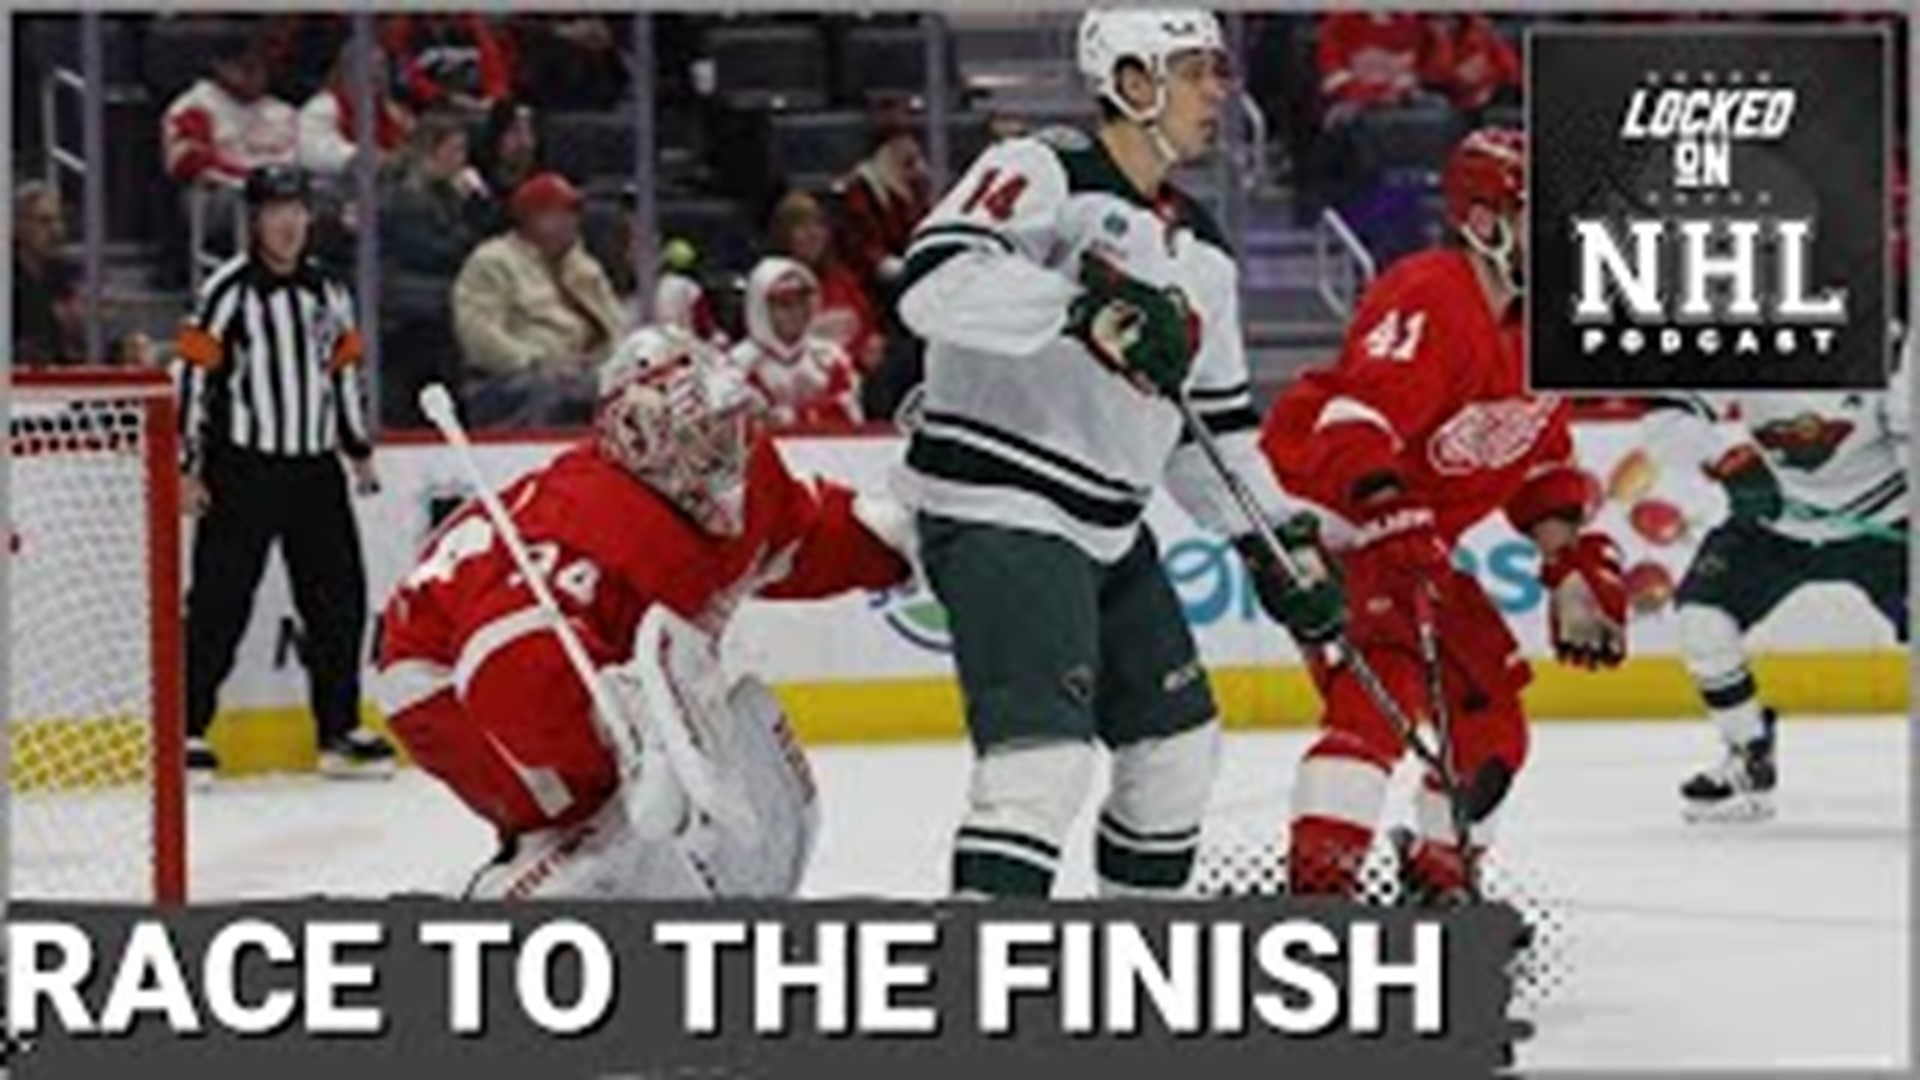 The Detroit Red Wings ended their seven-game losing streak and are still in a dog fight for the final playoff spot in the Eastern Conference.